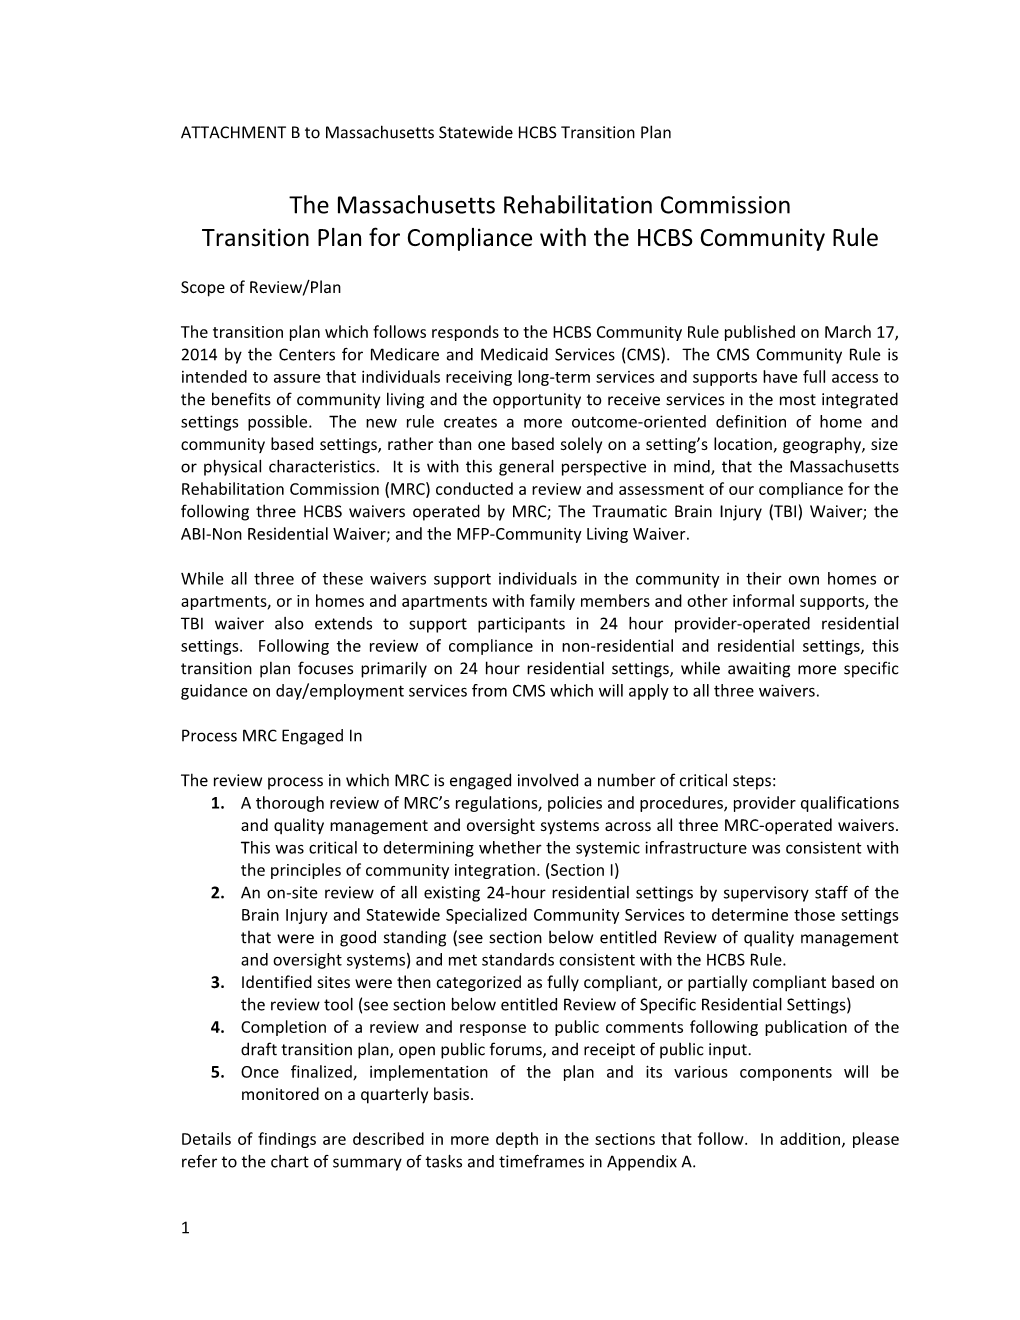 ATTACHMENT B to Massachusetts Statewide HCBS Transition Plan